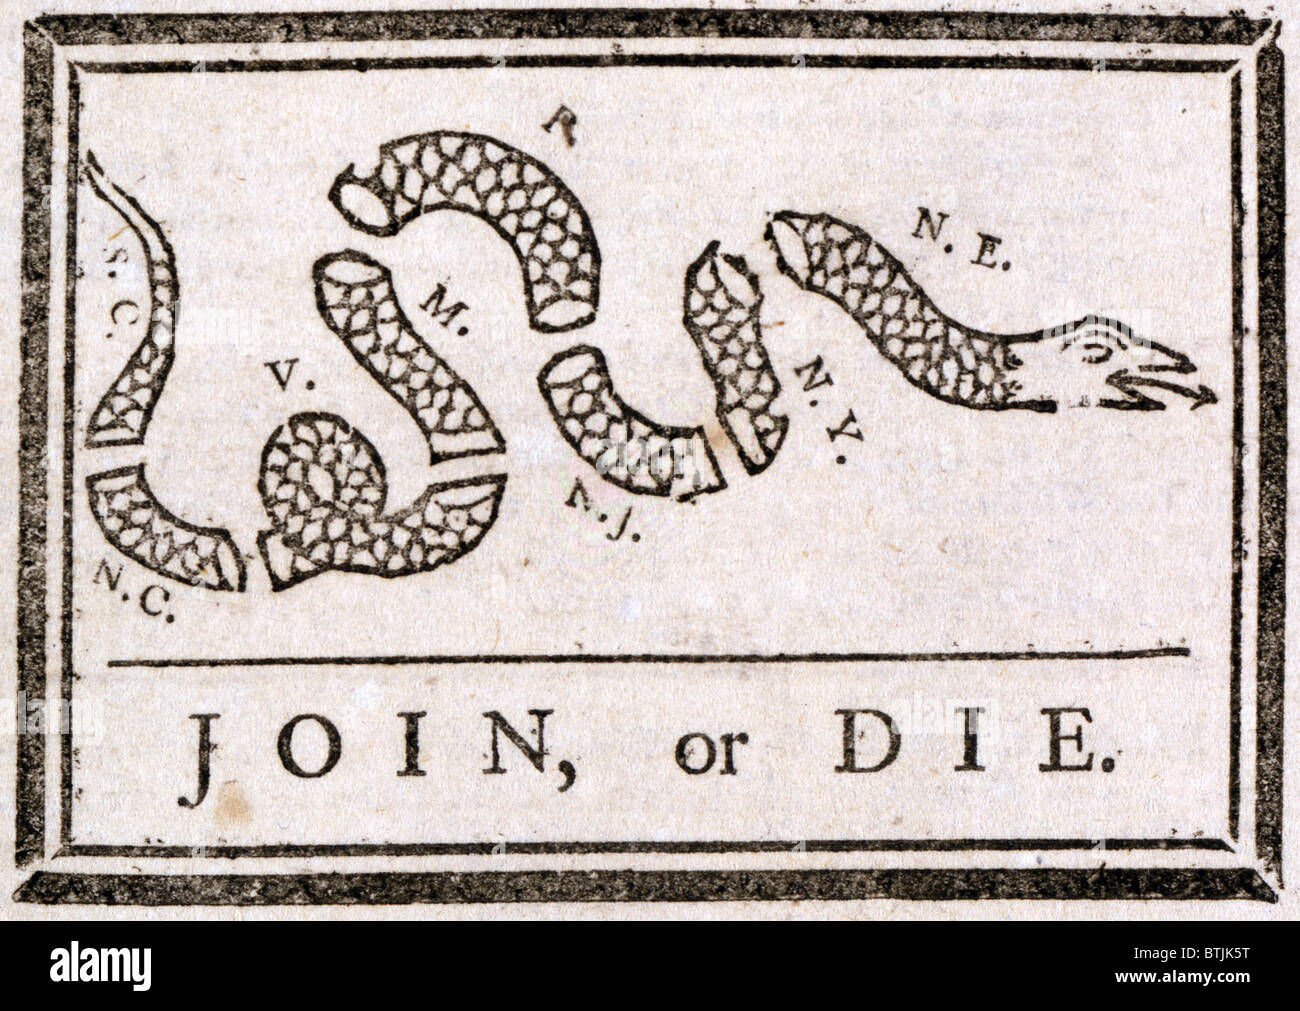 The American Revolution, Join or die, Benjamin Franklin's warning to the British colonies in America, 'Join or die' exhorting them to unite against the French and the natives, shows a segmented snake, from The Pennsylvania Gazette, by Benjamin Franklin, circa 1754. Stock Photo